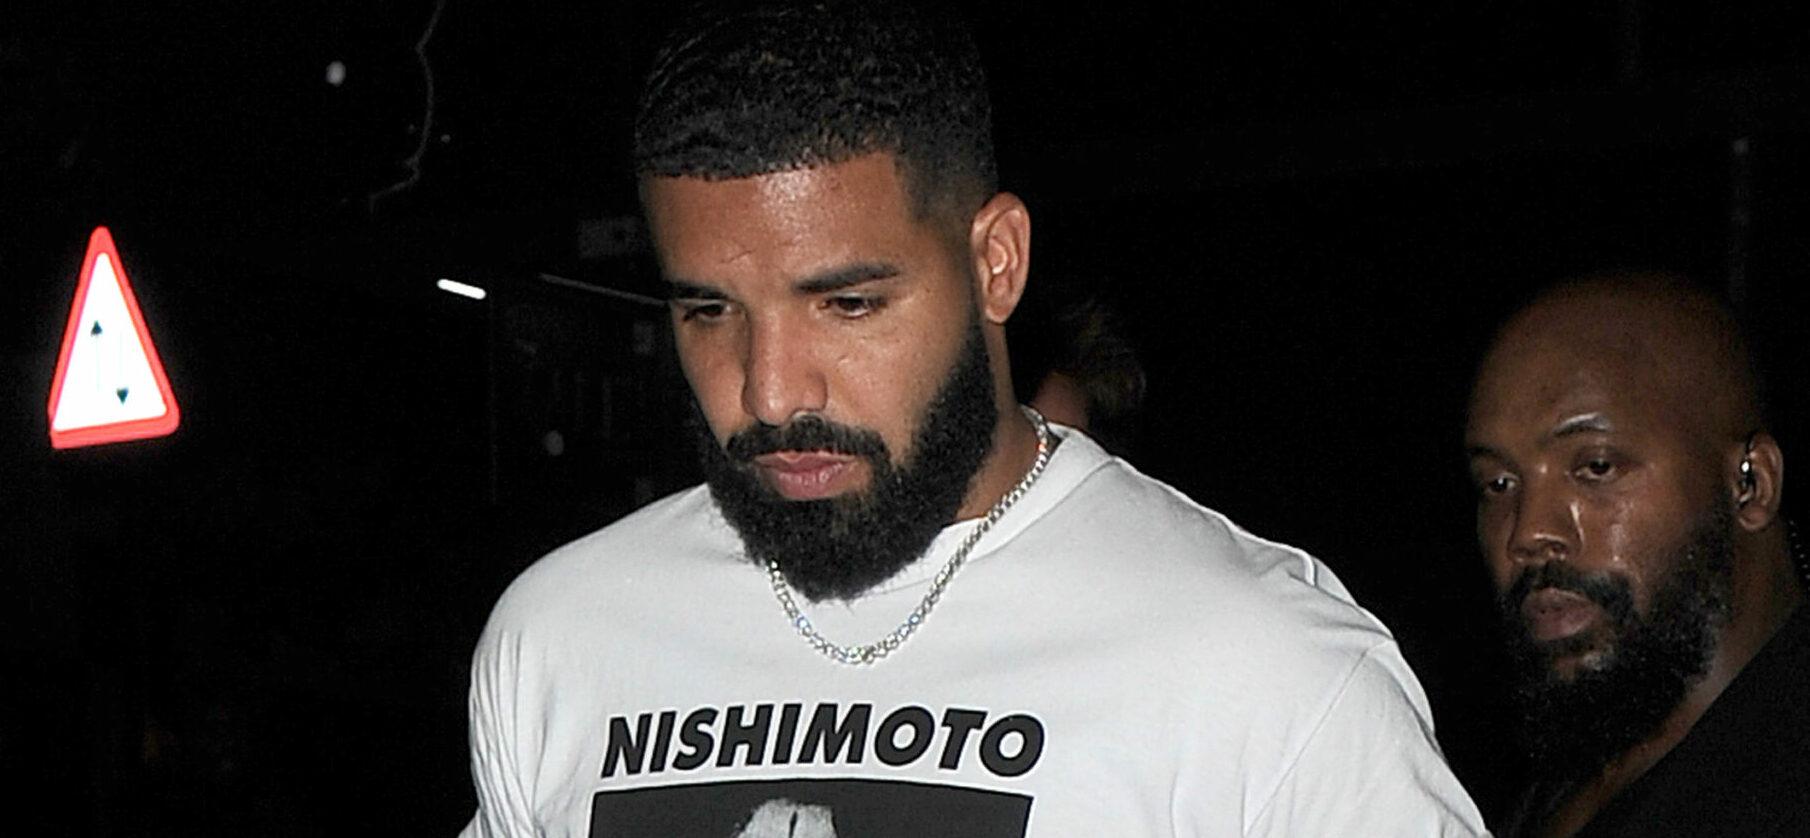 Drake is seen leaving the Playboy Club in Mayfair at 4am